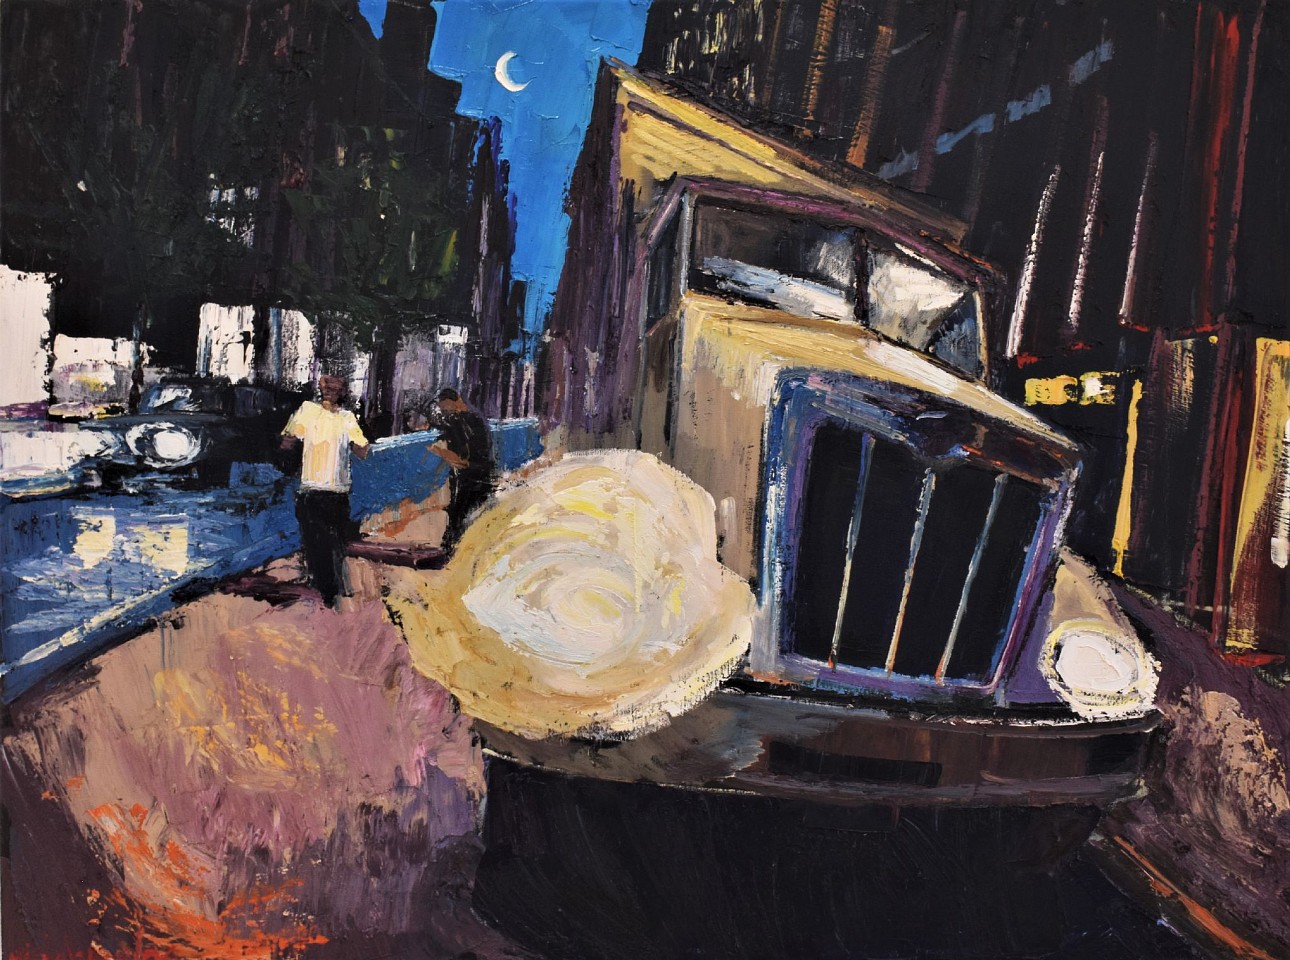 James Michalopoulos, Truck Stopped
Oil on Canvas, 30 x 40 in.
$12,000